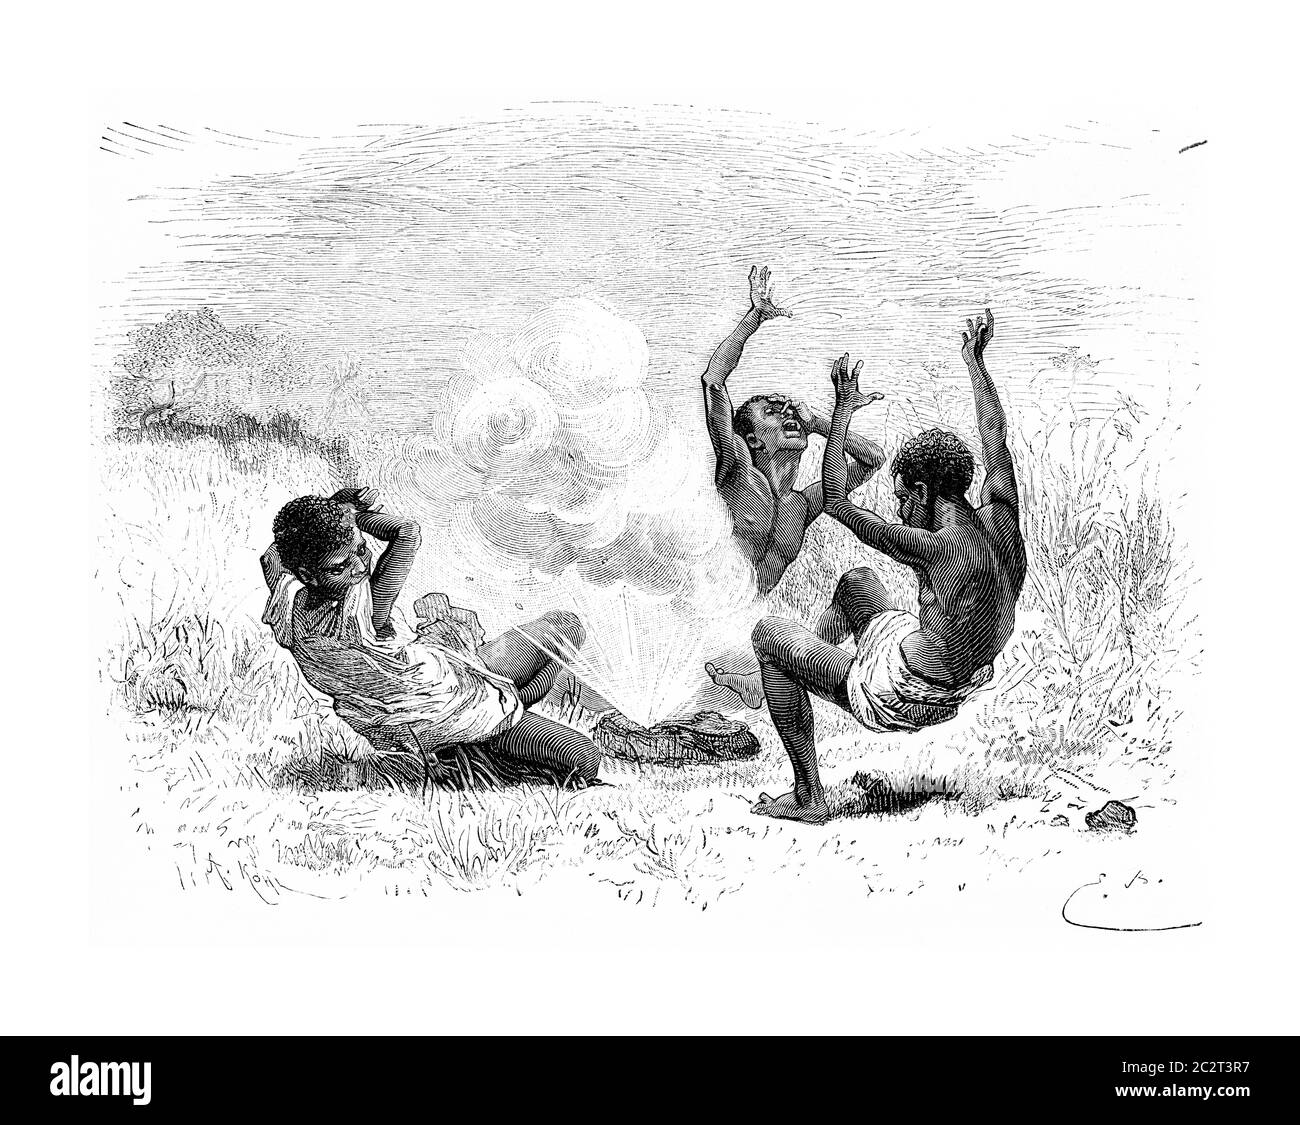 A Bullet Explodes on Three Natives in Angola, Southern Africa, drawing by Bayard based on a sketch by Serpa Pinto, vintage engraved illustration. Le T Stock Photo